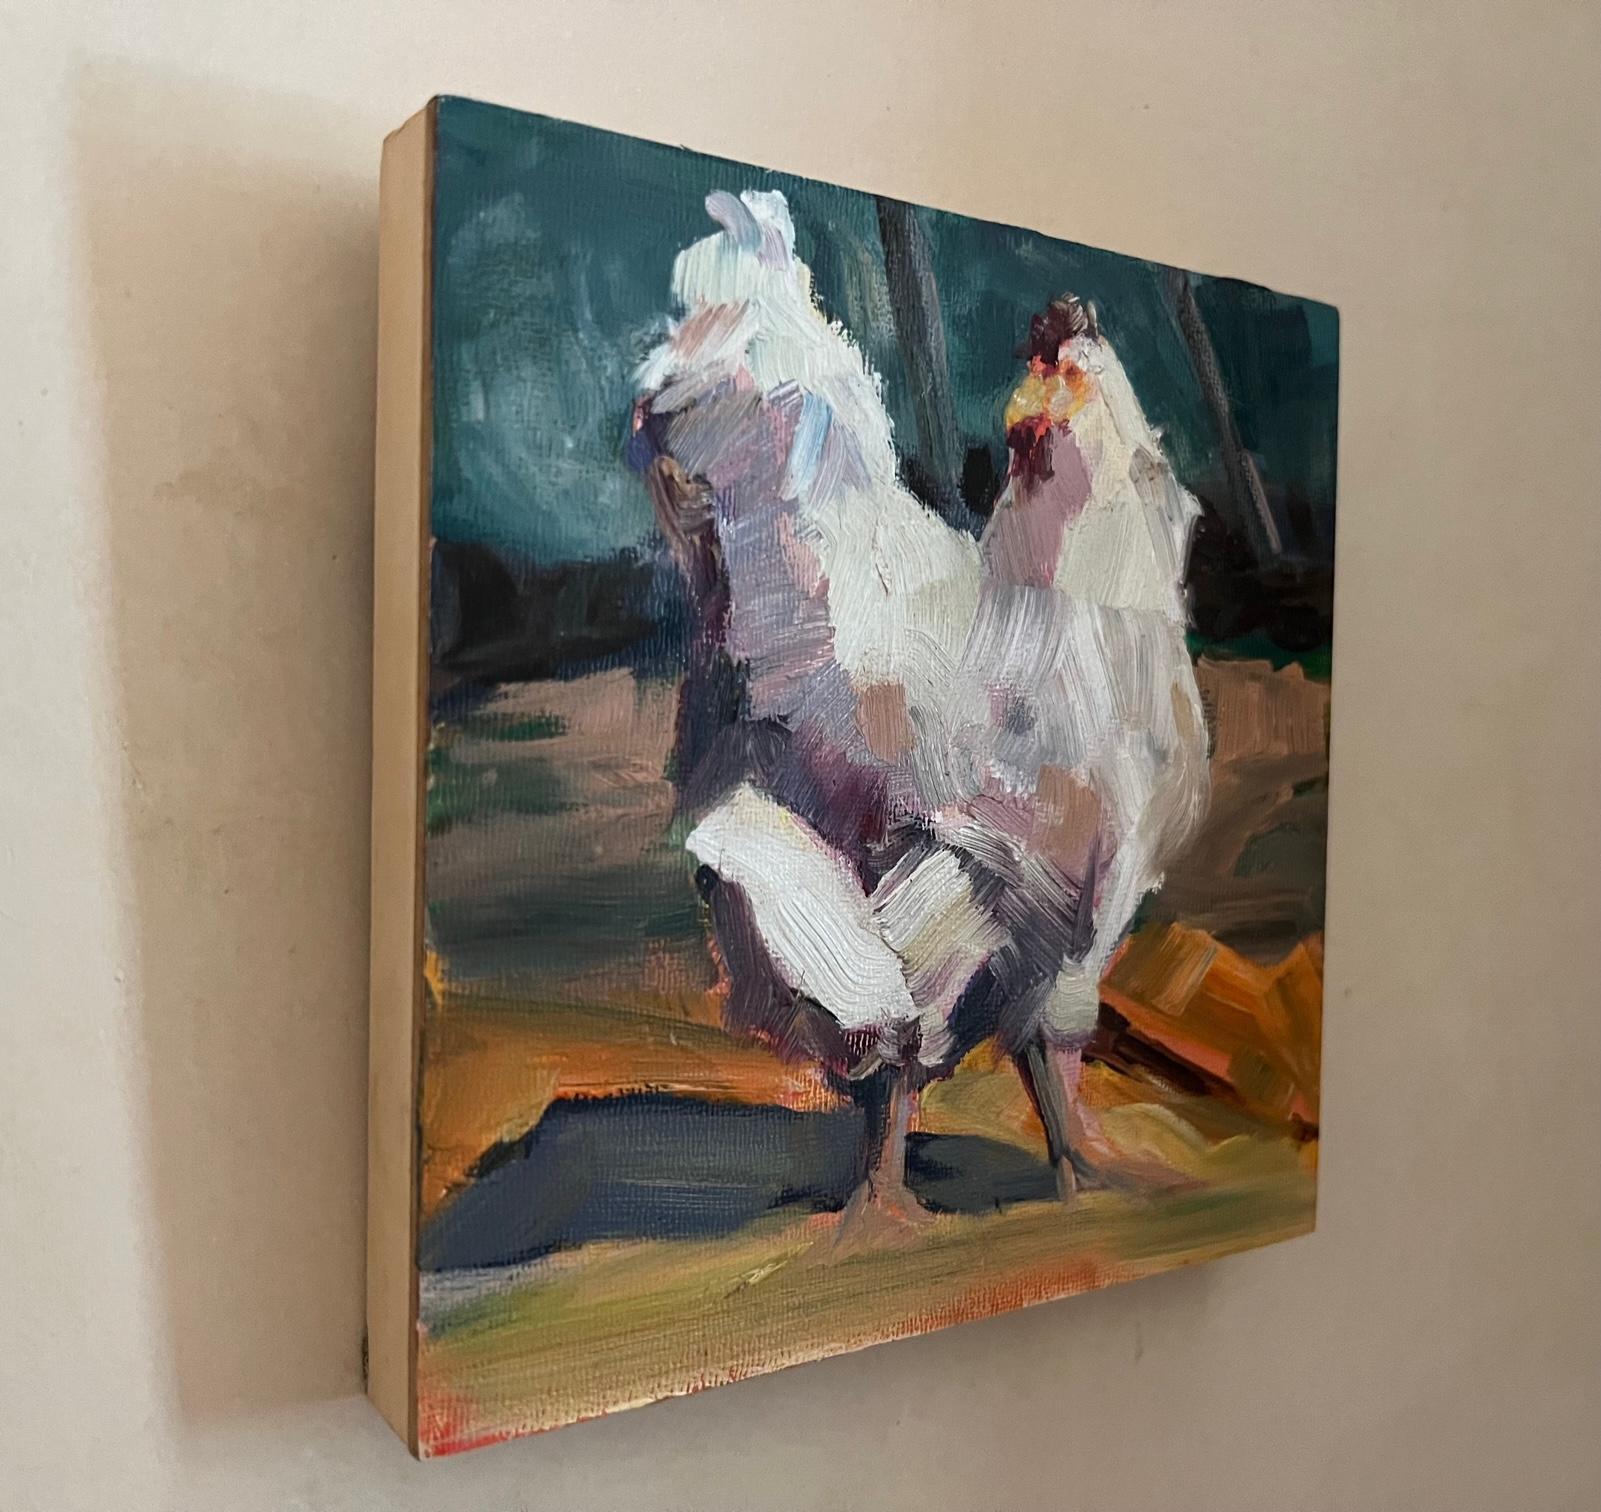 Gen Zorich is a Sonoma County California artist creating contemporary and expressive art. The painting is on wood, measures 6 x 6  and is titled Happy Hen.